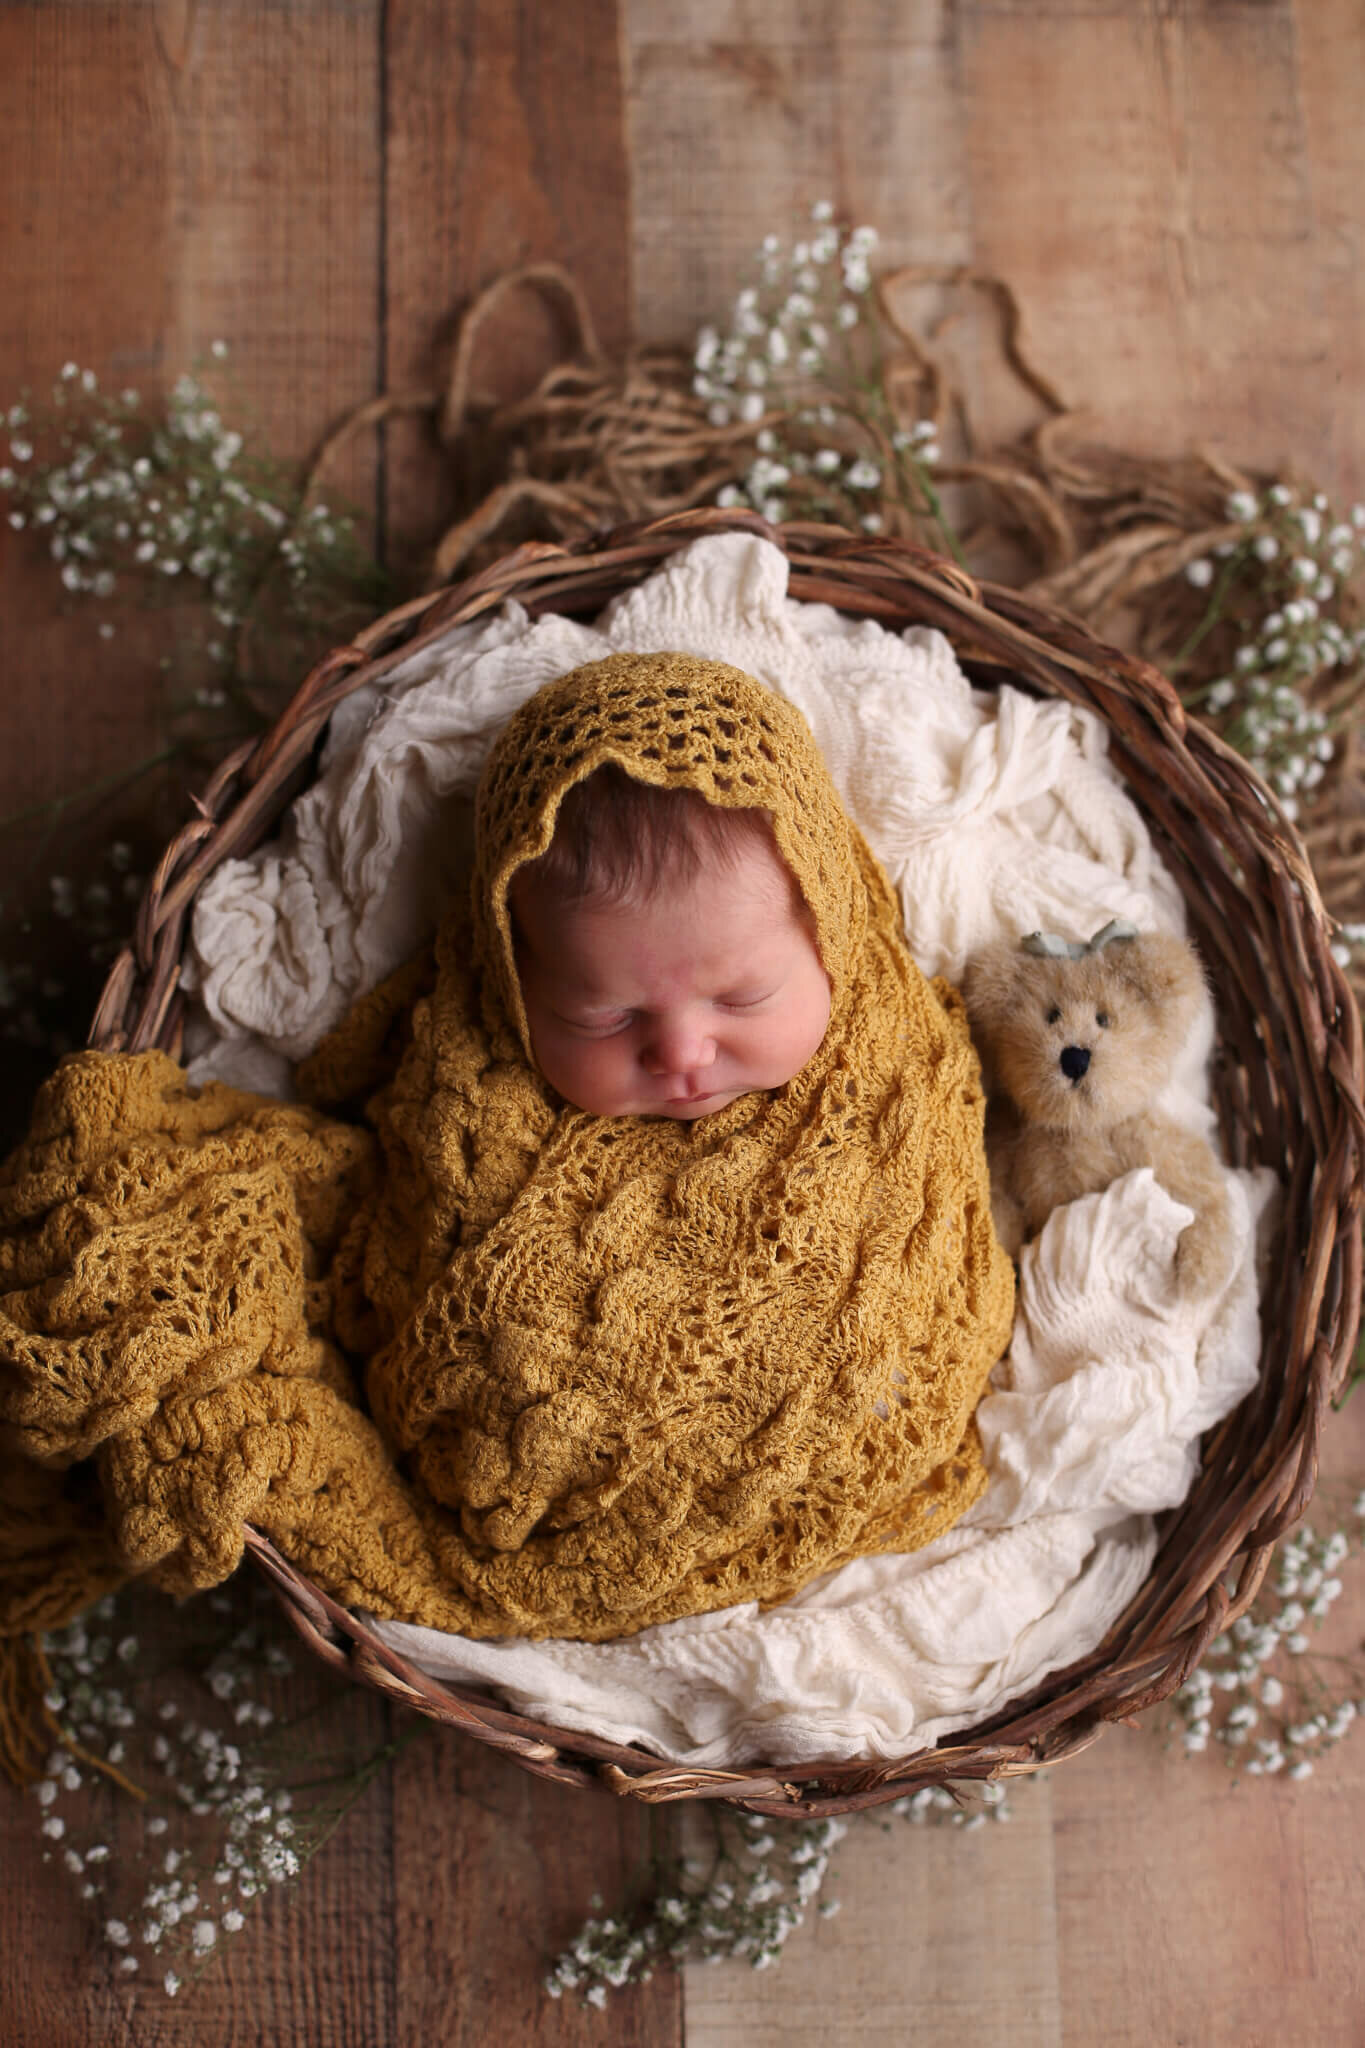  A picture of a newborn baby wrapped in a crocheted blanket, sleeping with a teddy bear in a basket surrounded by tiny flowers by Photography by L Rose - San Diego CA newborn photography 